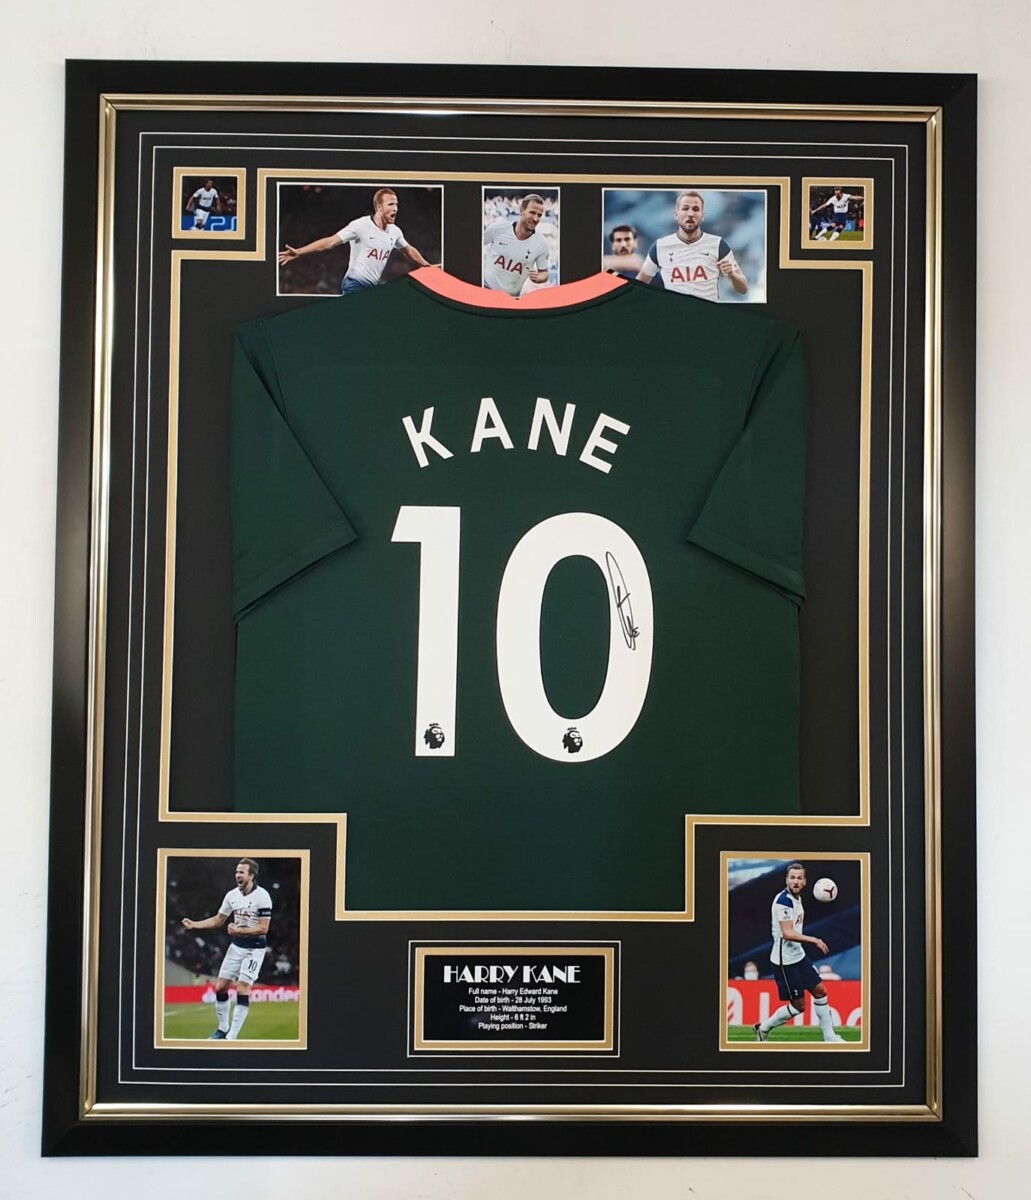 Enter Raffle to Win Signed Harry Kane Shirt hosted by In Memory of